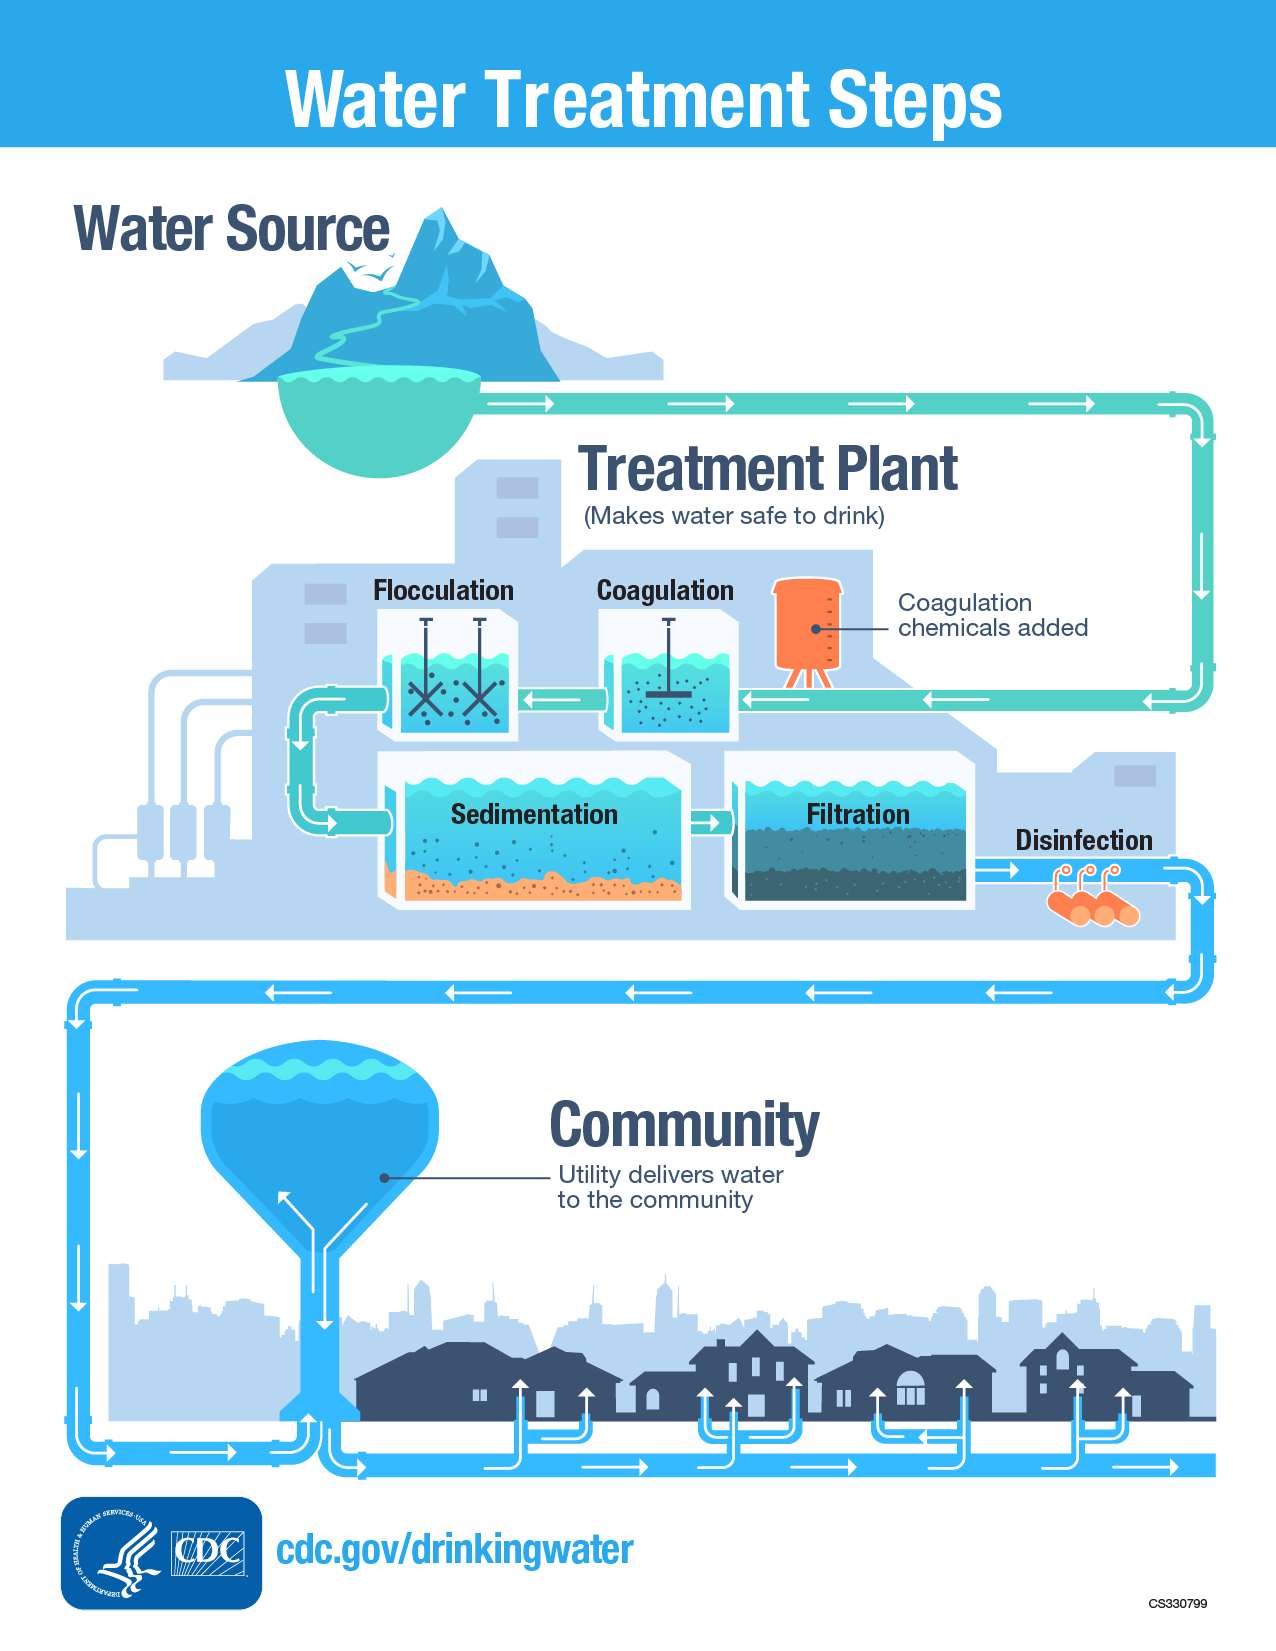 How is Water Treated in Water Treatment Plant?